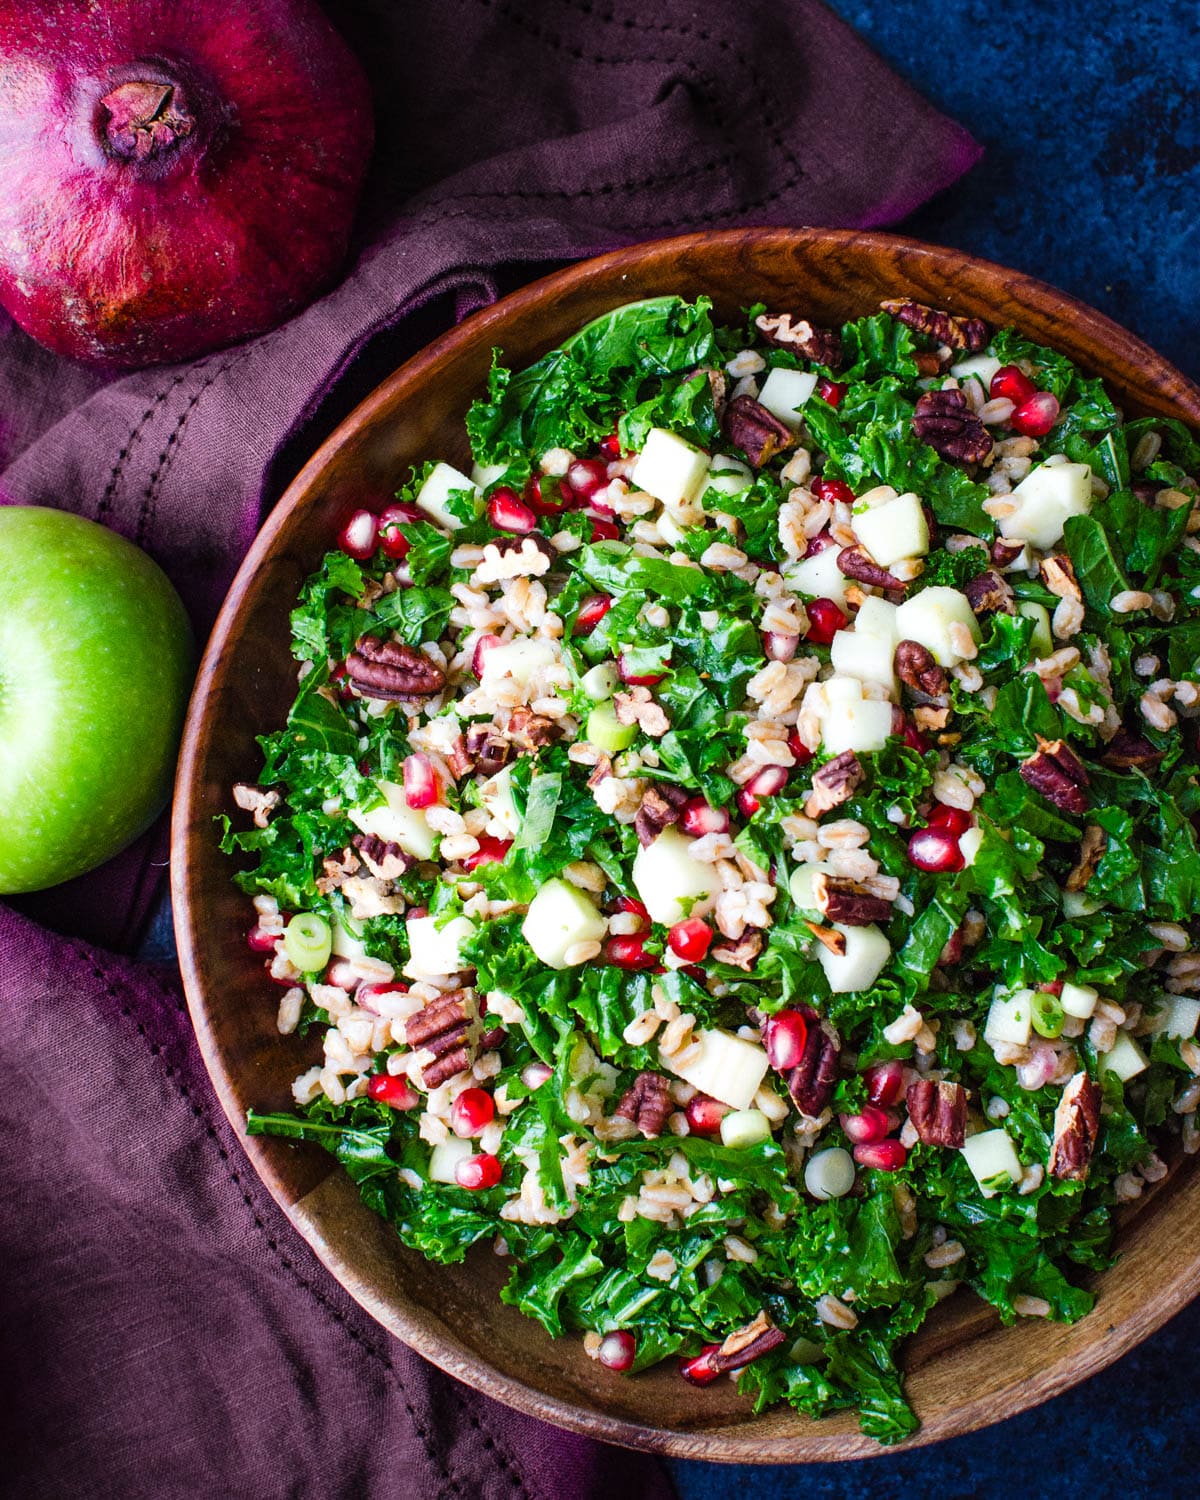 Kale pomegranate salad with apples and pecans in a wooden serving bowl.